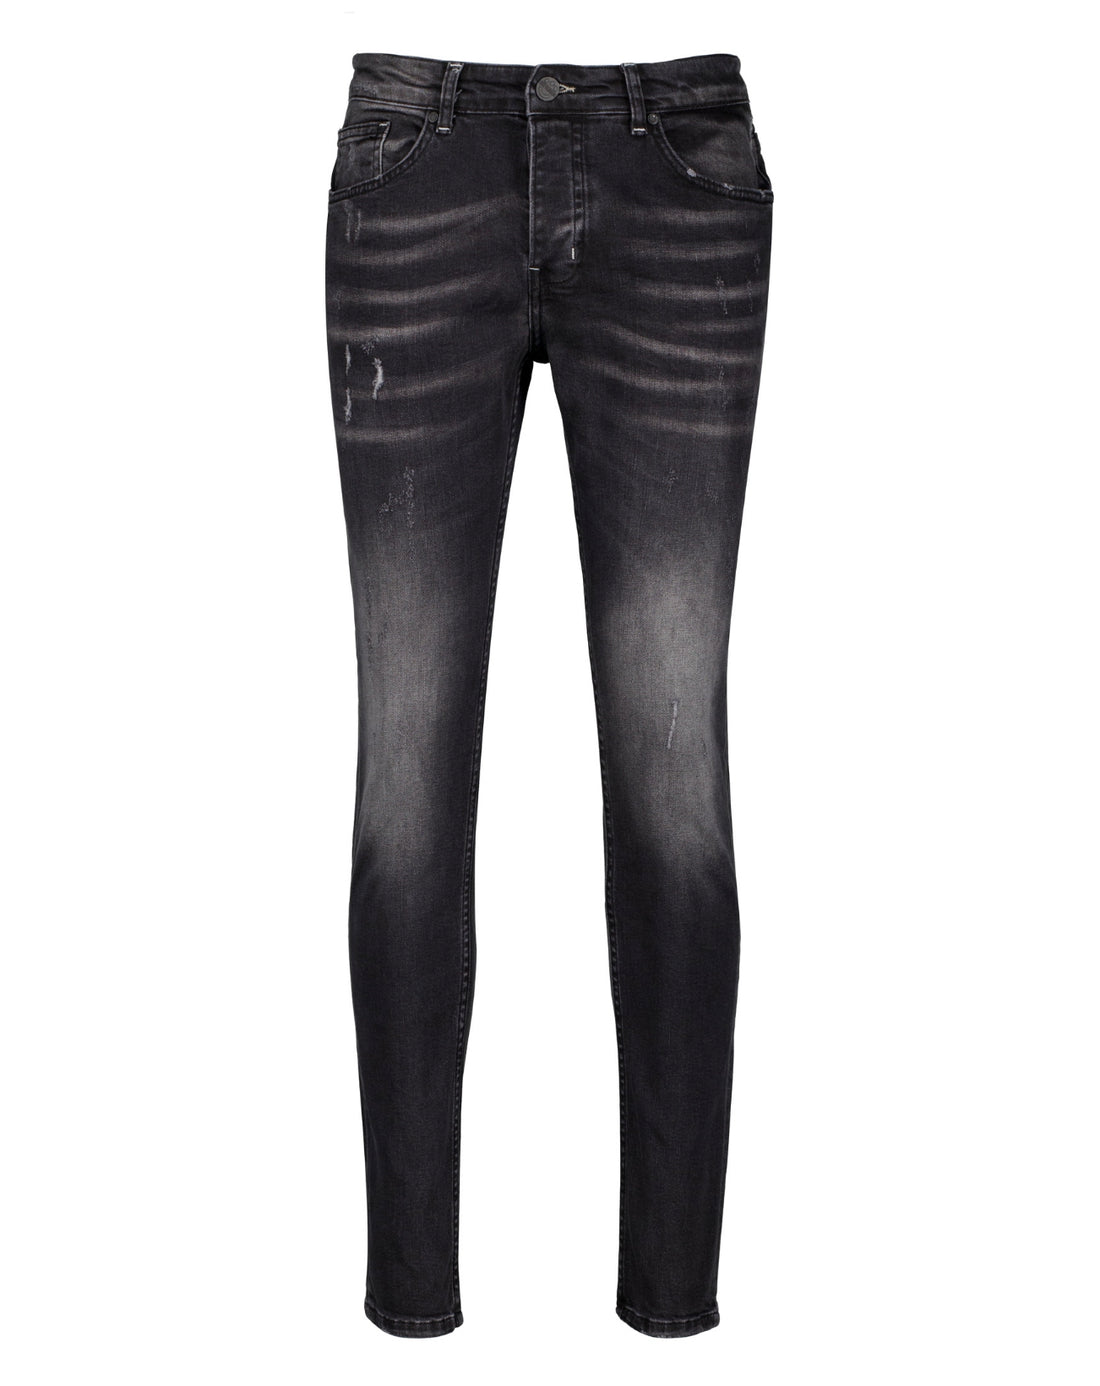 The Tulla Grey Ripped Jeans - Jeans by Urbbana